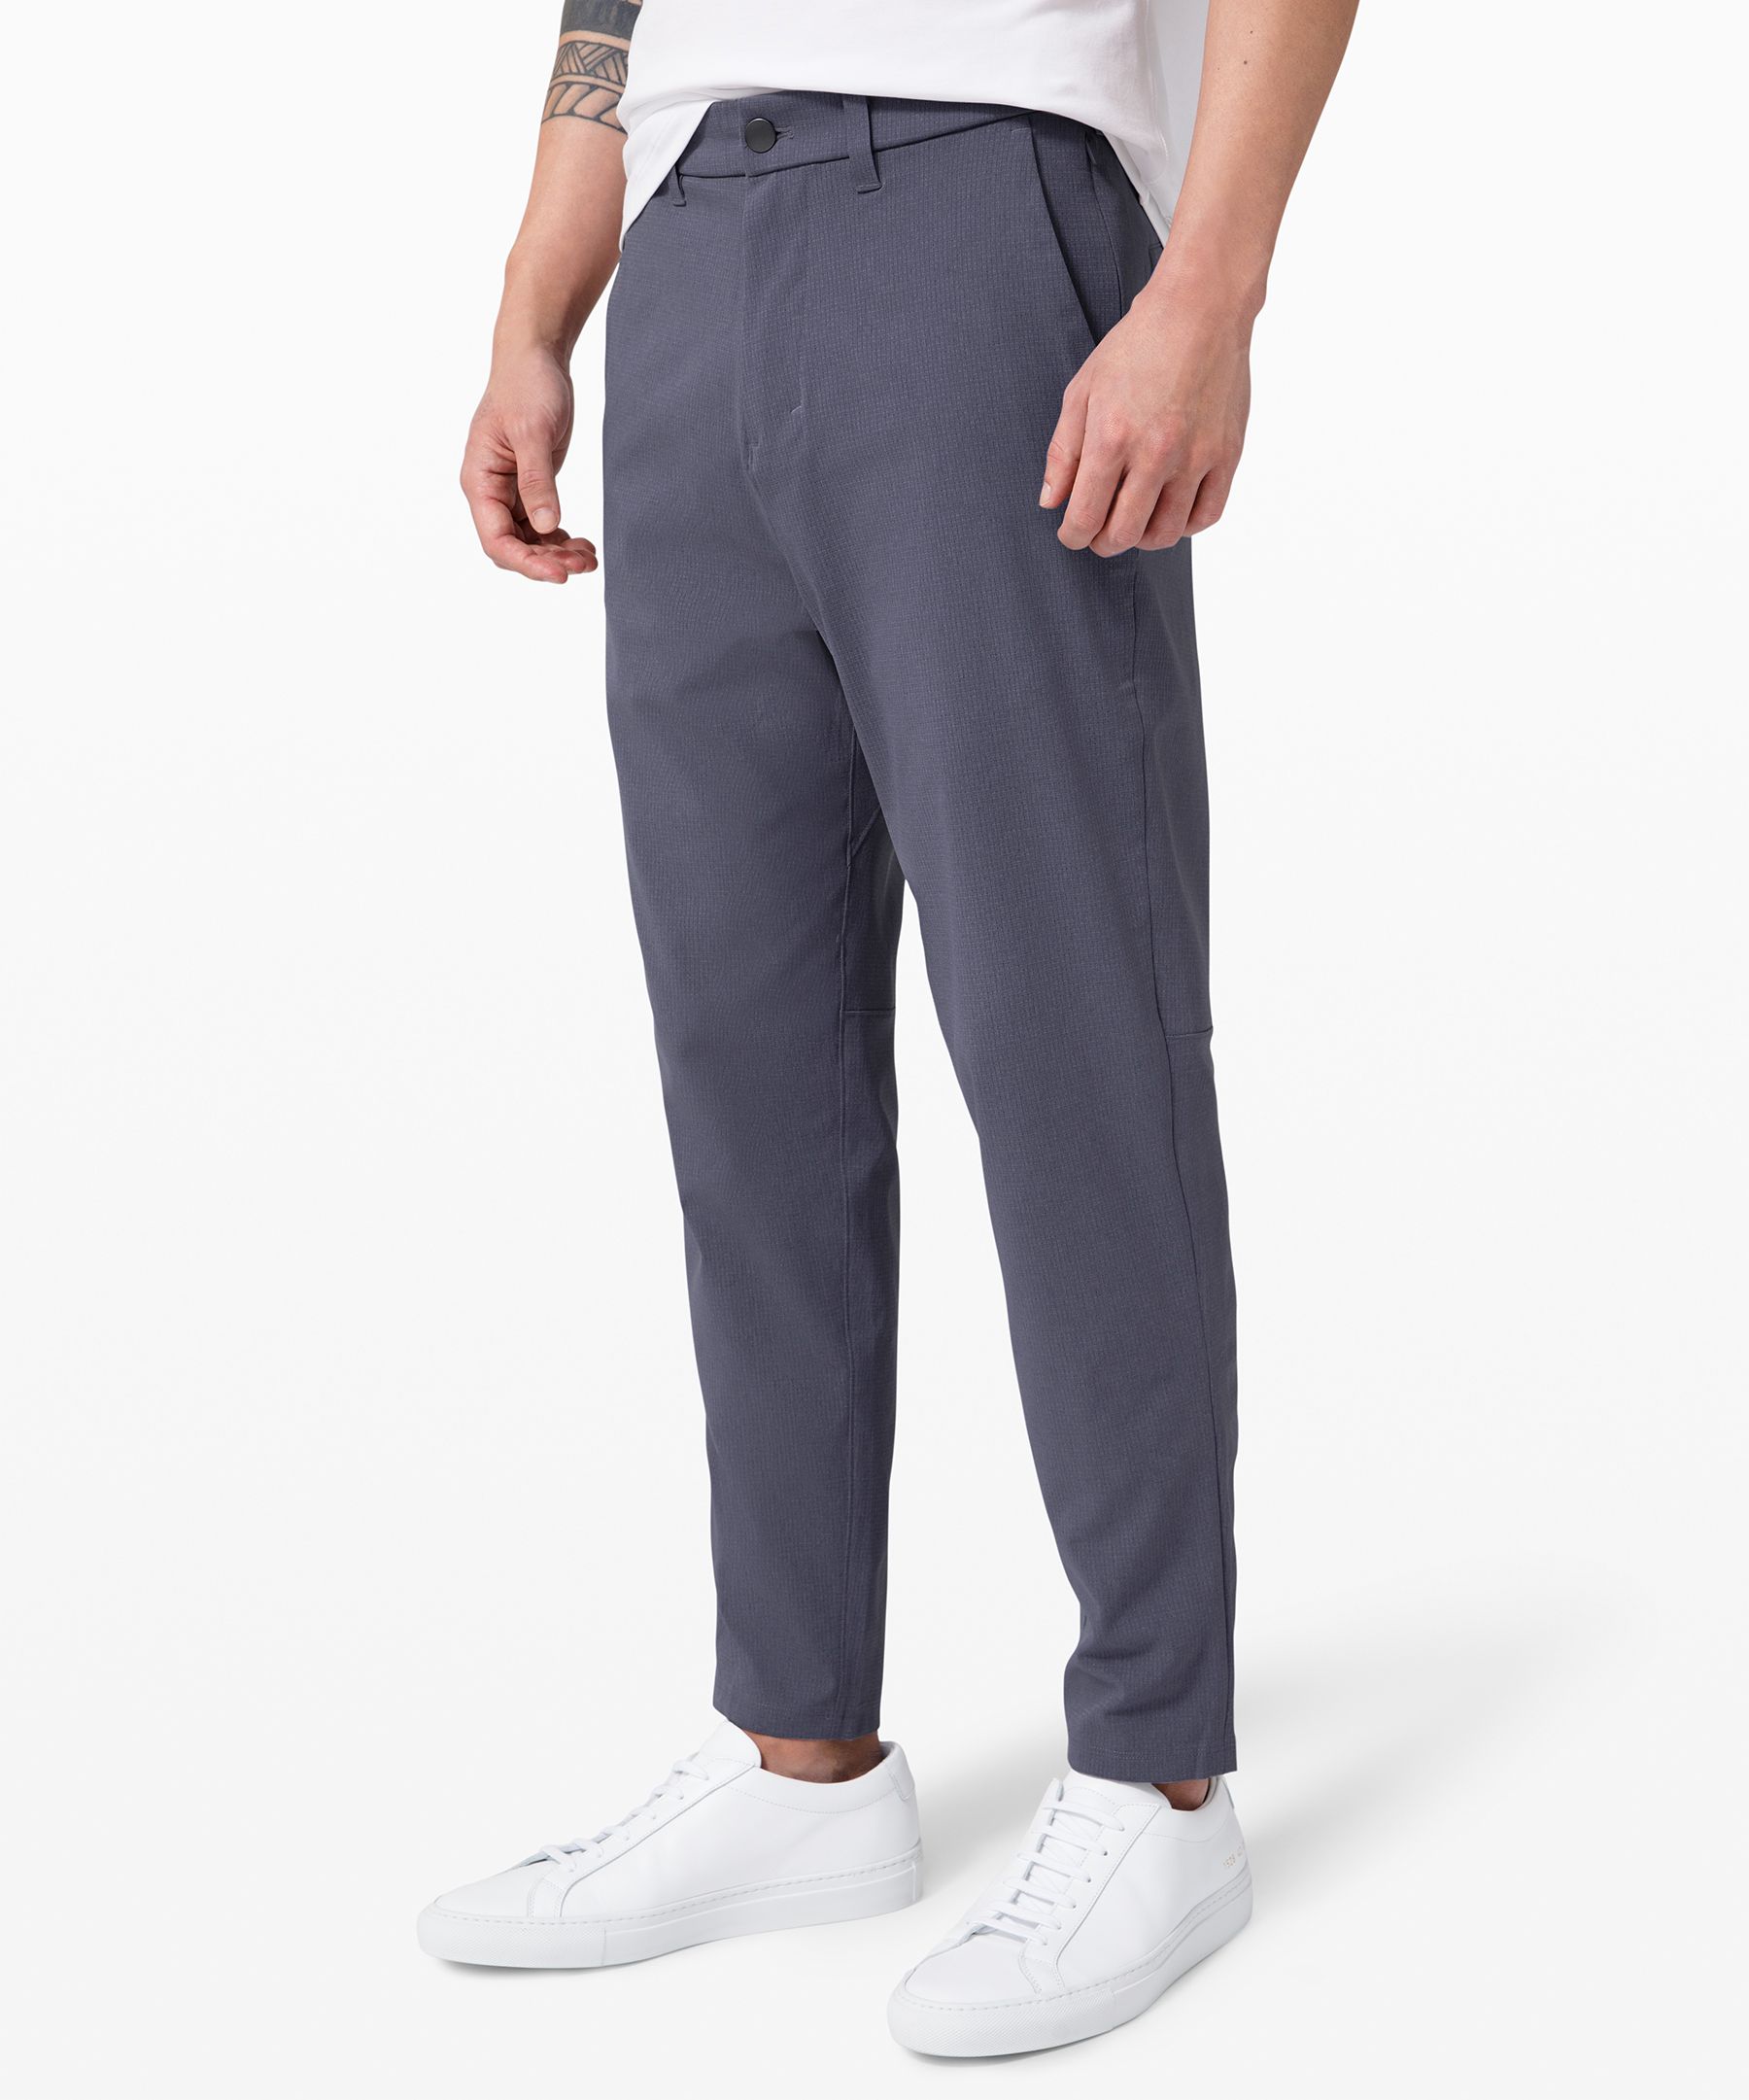 UNIQLO EZY Ankle Pants Review, Try On